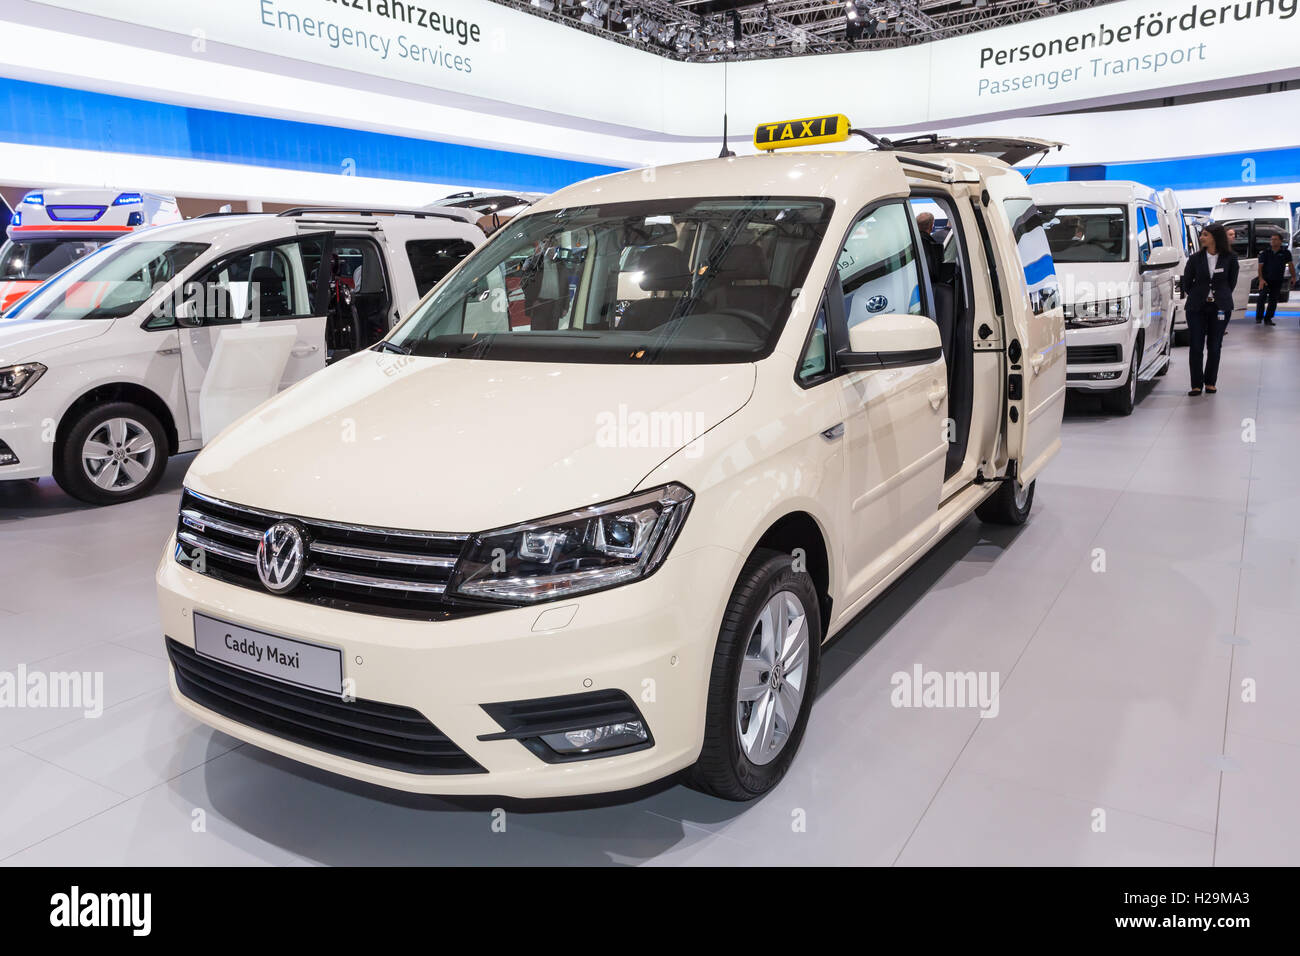 New Volkswagen Caddy Maxi Taxi edition Stock Photo